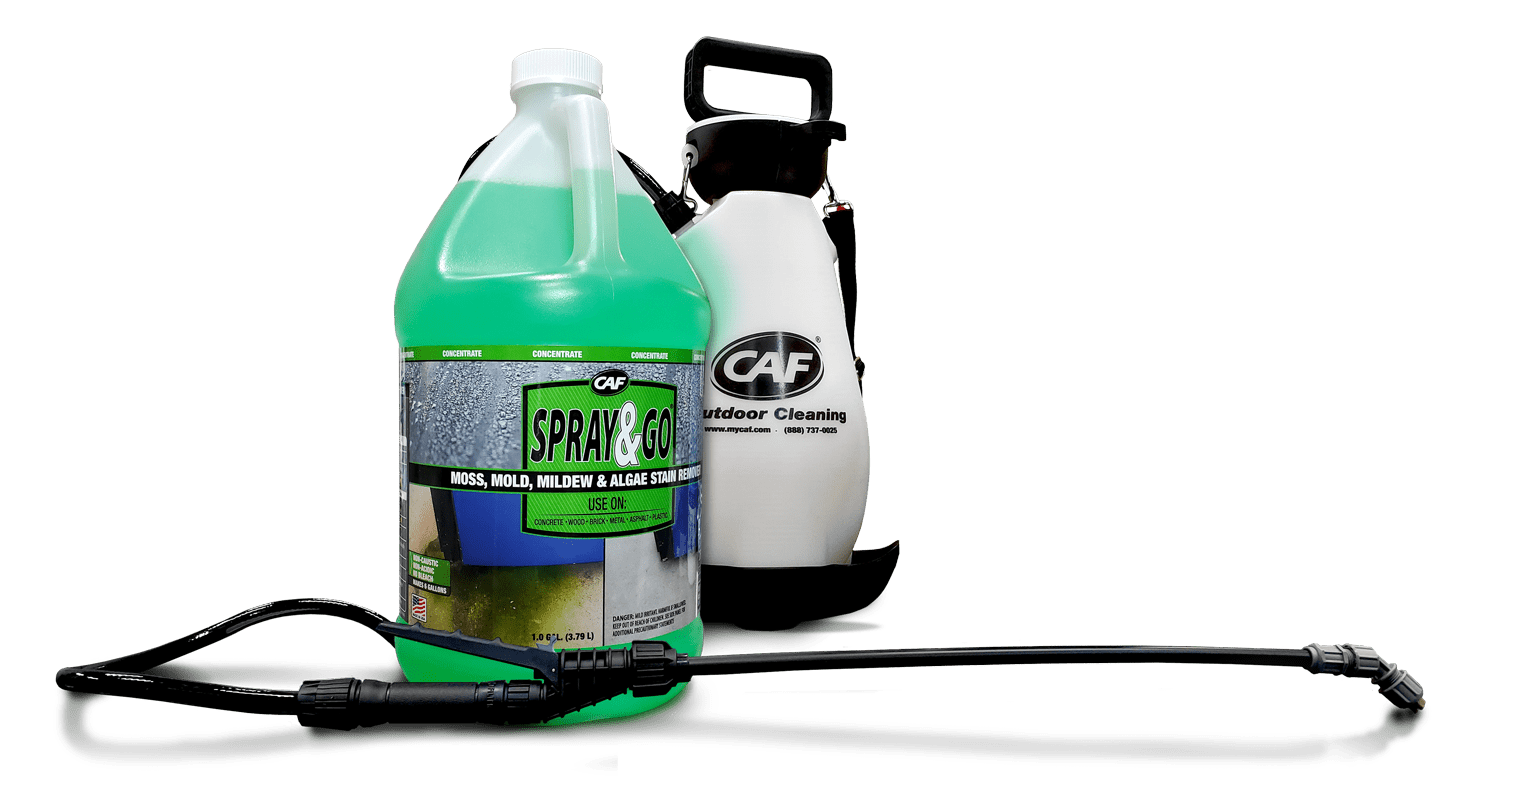 spray and go moss mold mildew stain remover